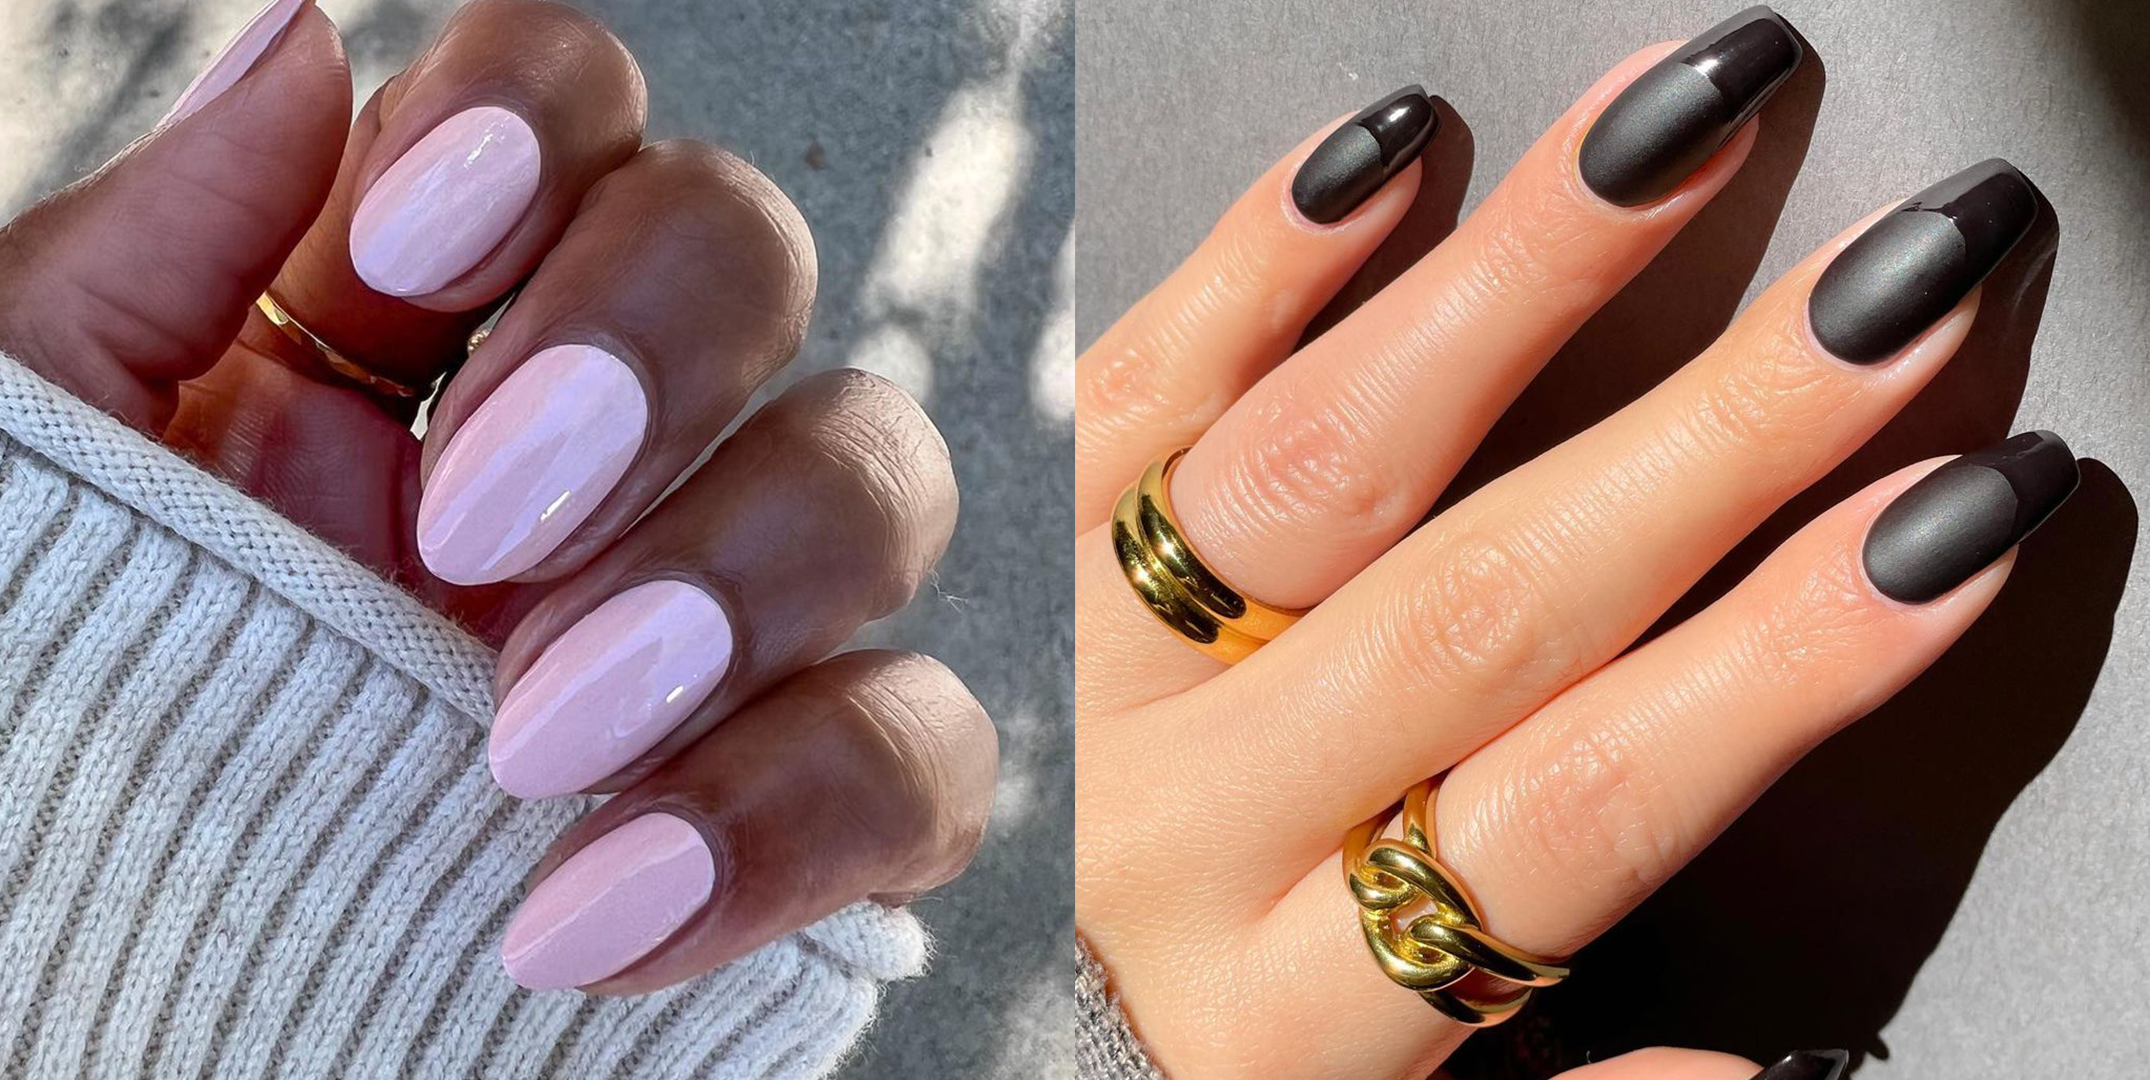 19 Manicures From New York Fashion Week to Inspire Your Next Salon Visit -  Fashionista